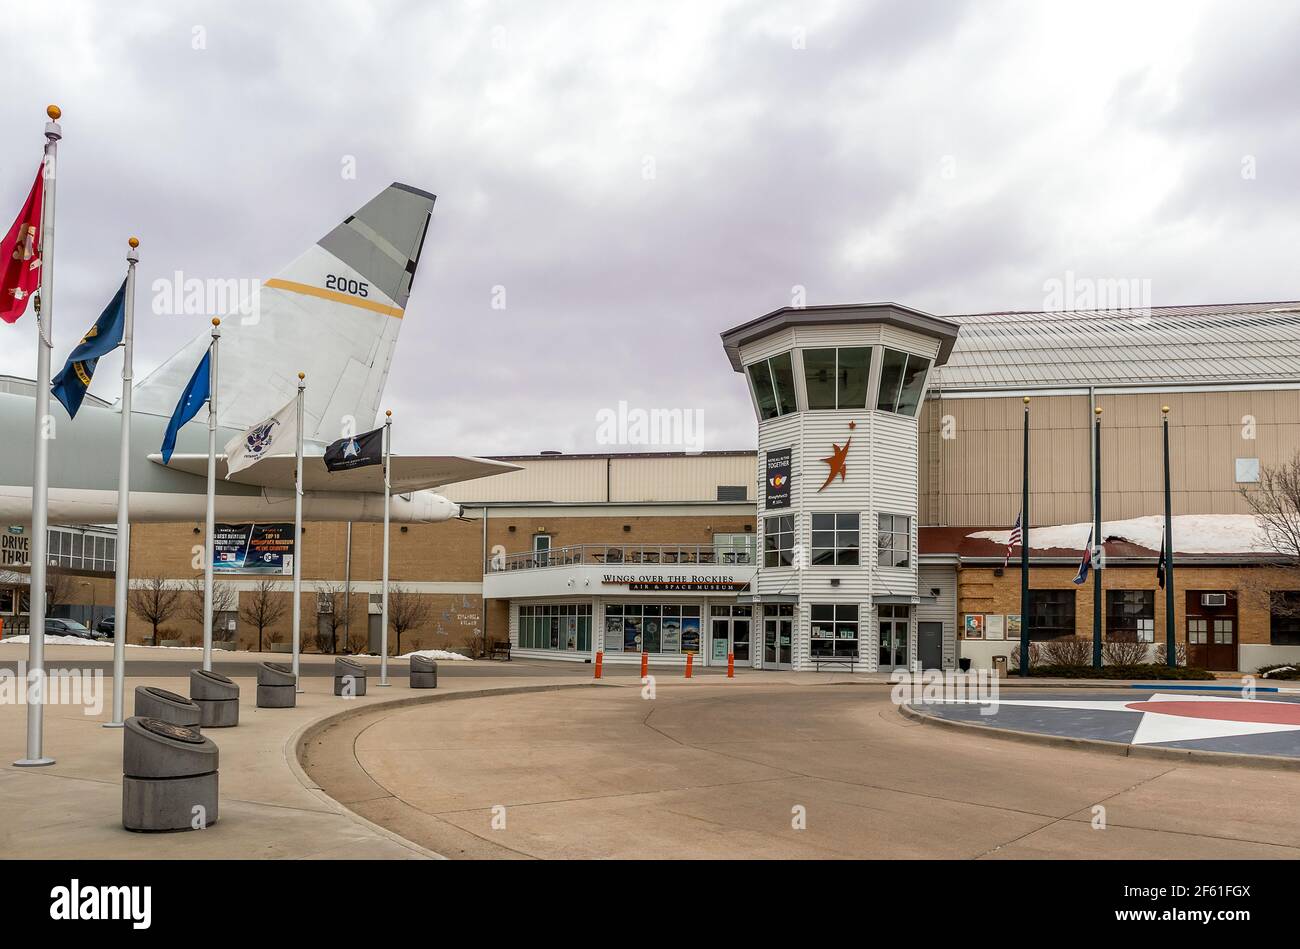 Denver, Colorado - March 21, 2021: Wings Over the Rocks - Air and Space Museum in Denver, Colorado Stock Photo